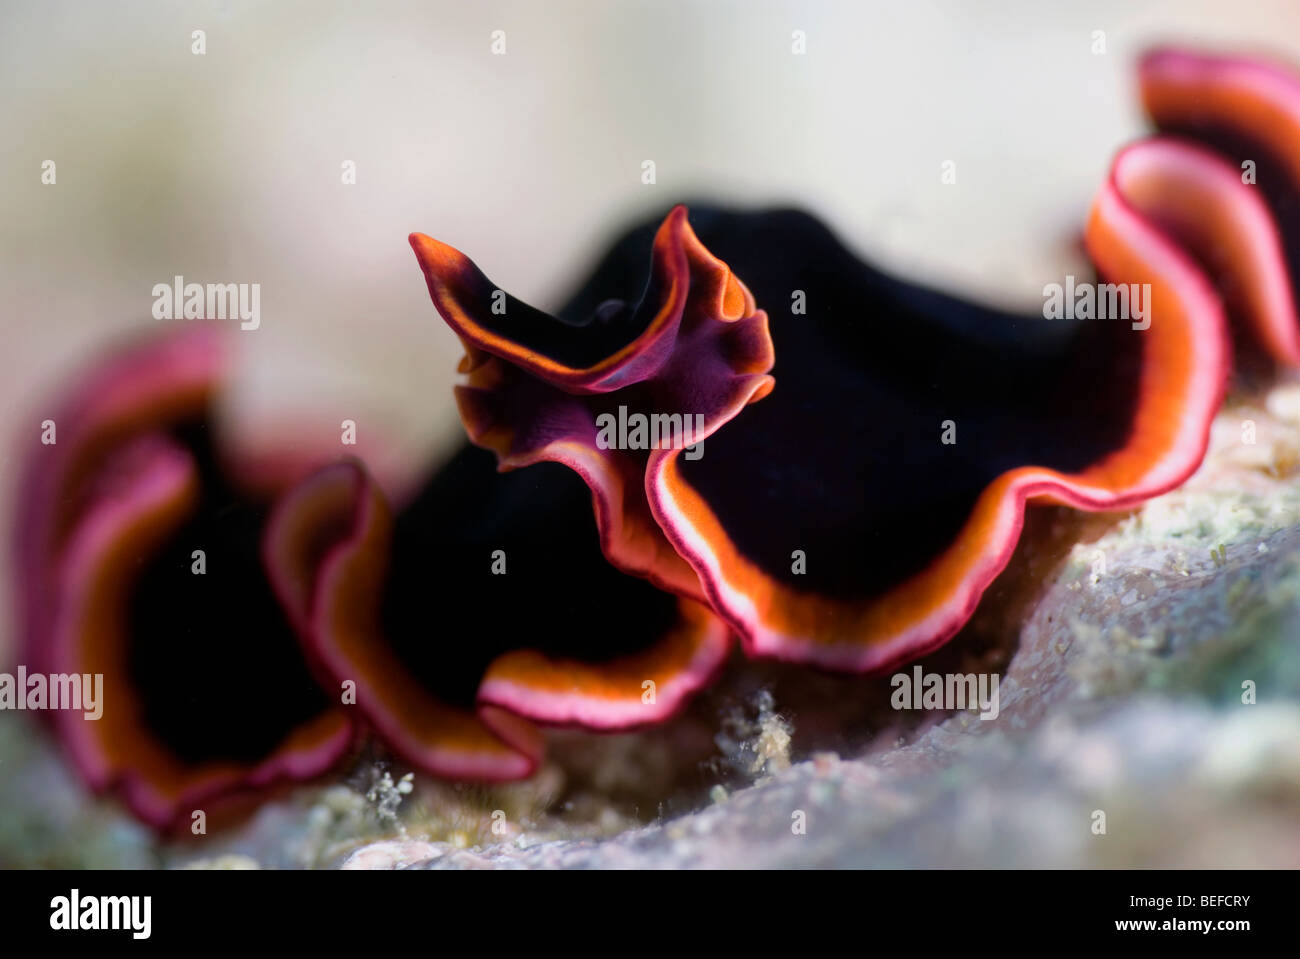 Black Flatworm with orang and pink outline under water. Stock Photo